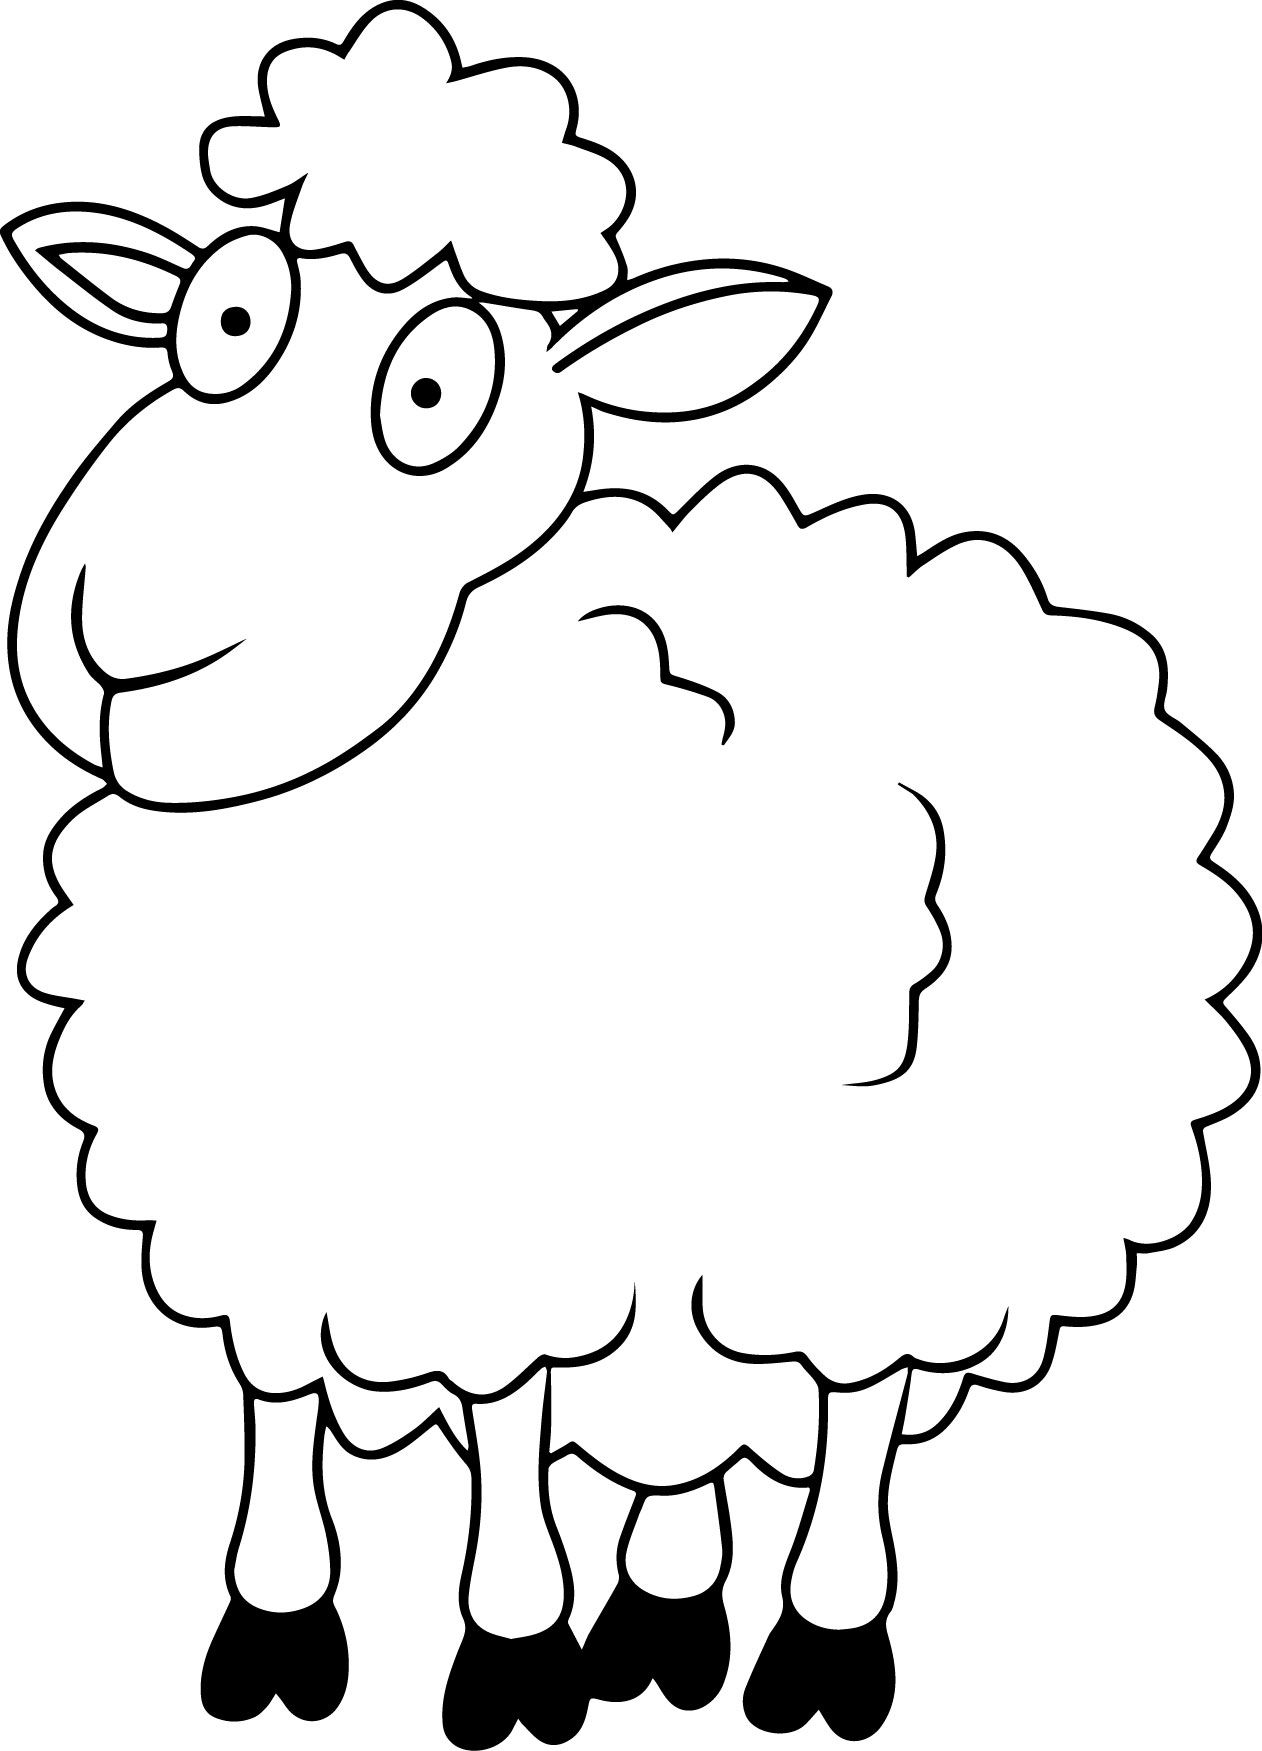 Sheep Outline Coloring Page - Coloring Home